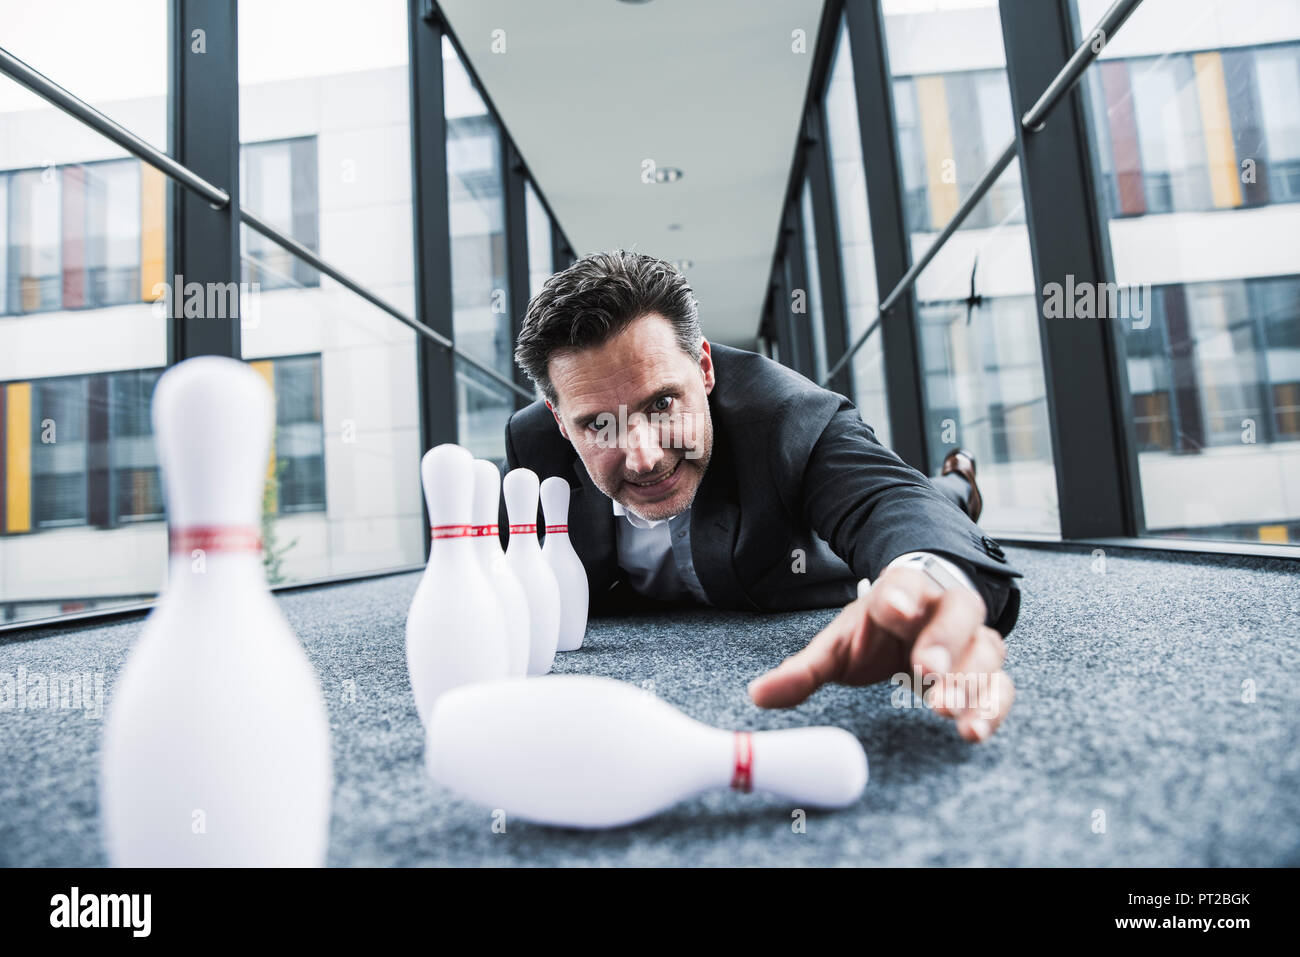 Obsessive manager lying on the floor in office passageway with pins Stock Photo